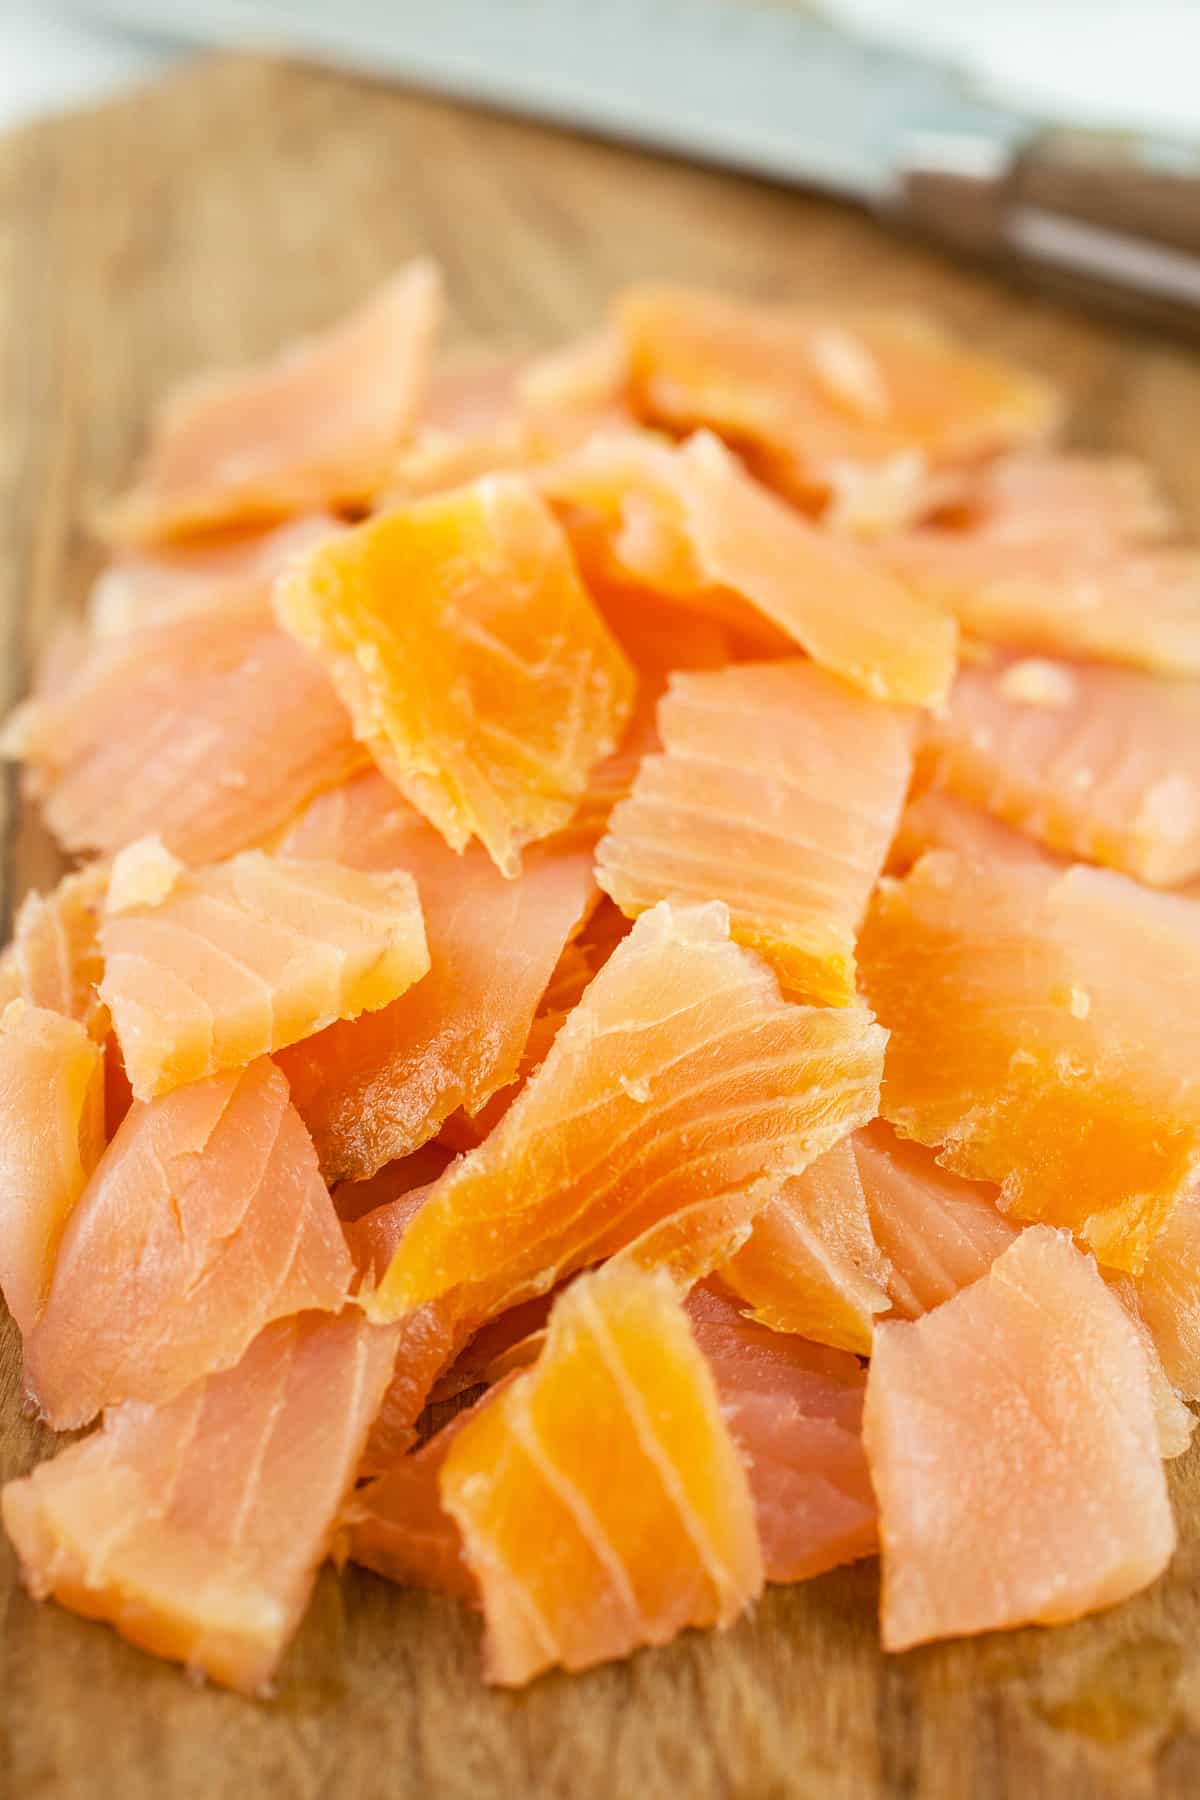 Chopped smoked salmon on wooden cutting board with knife.